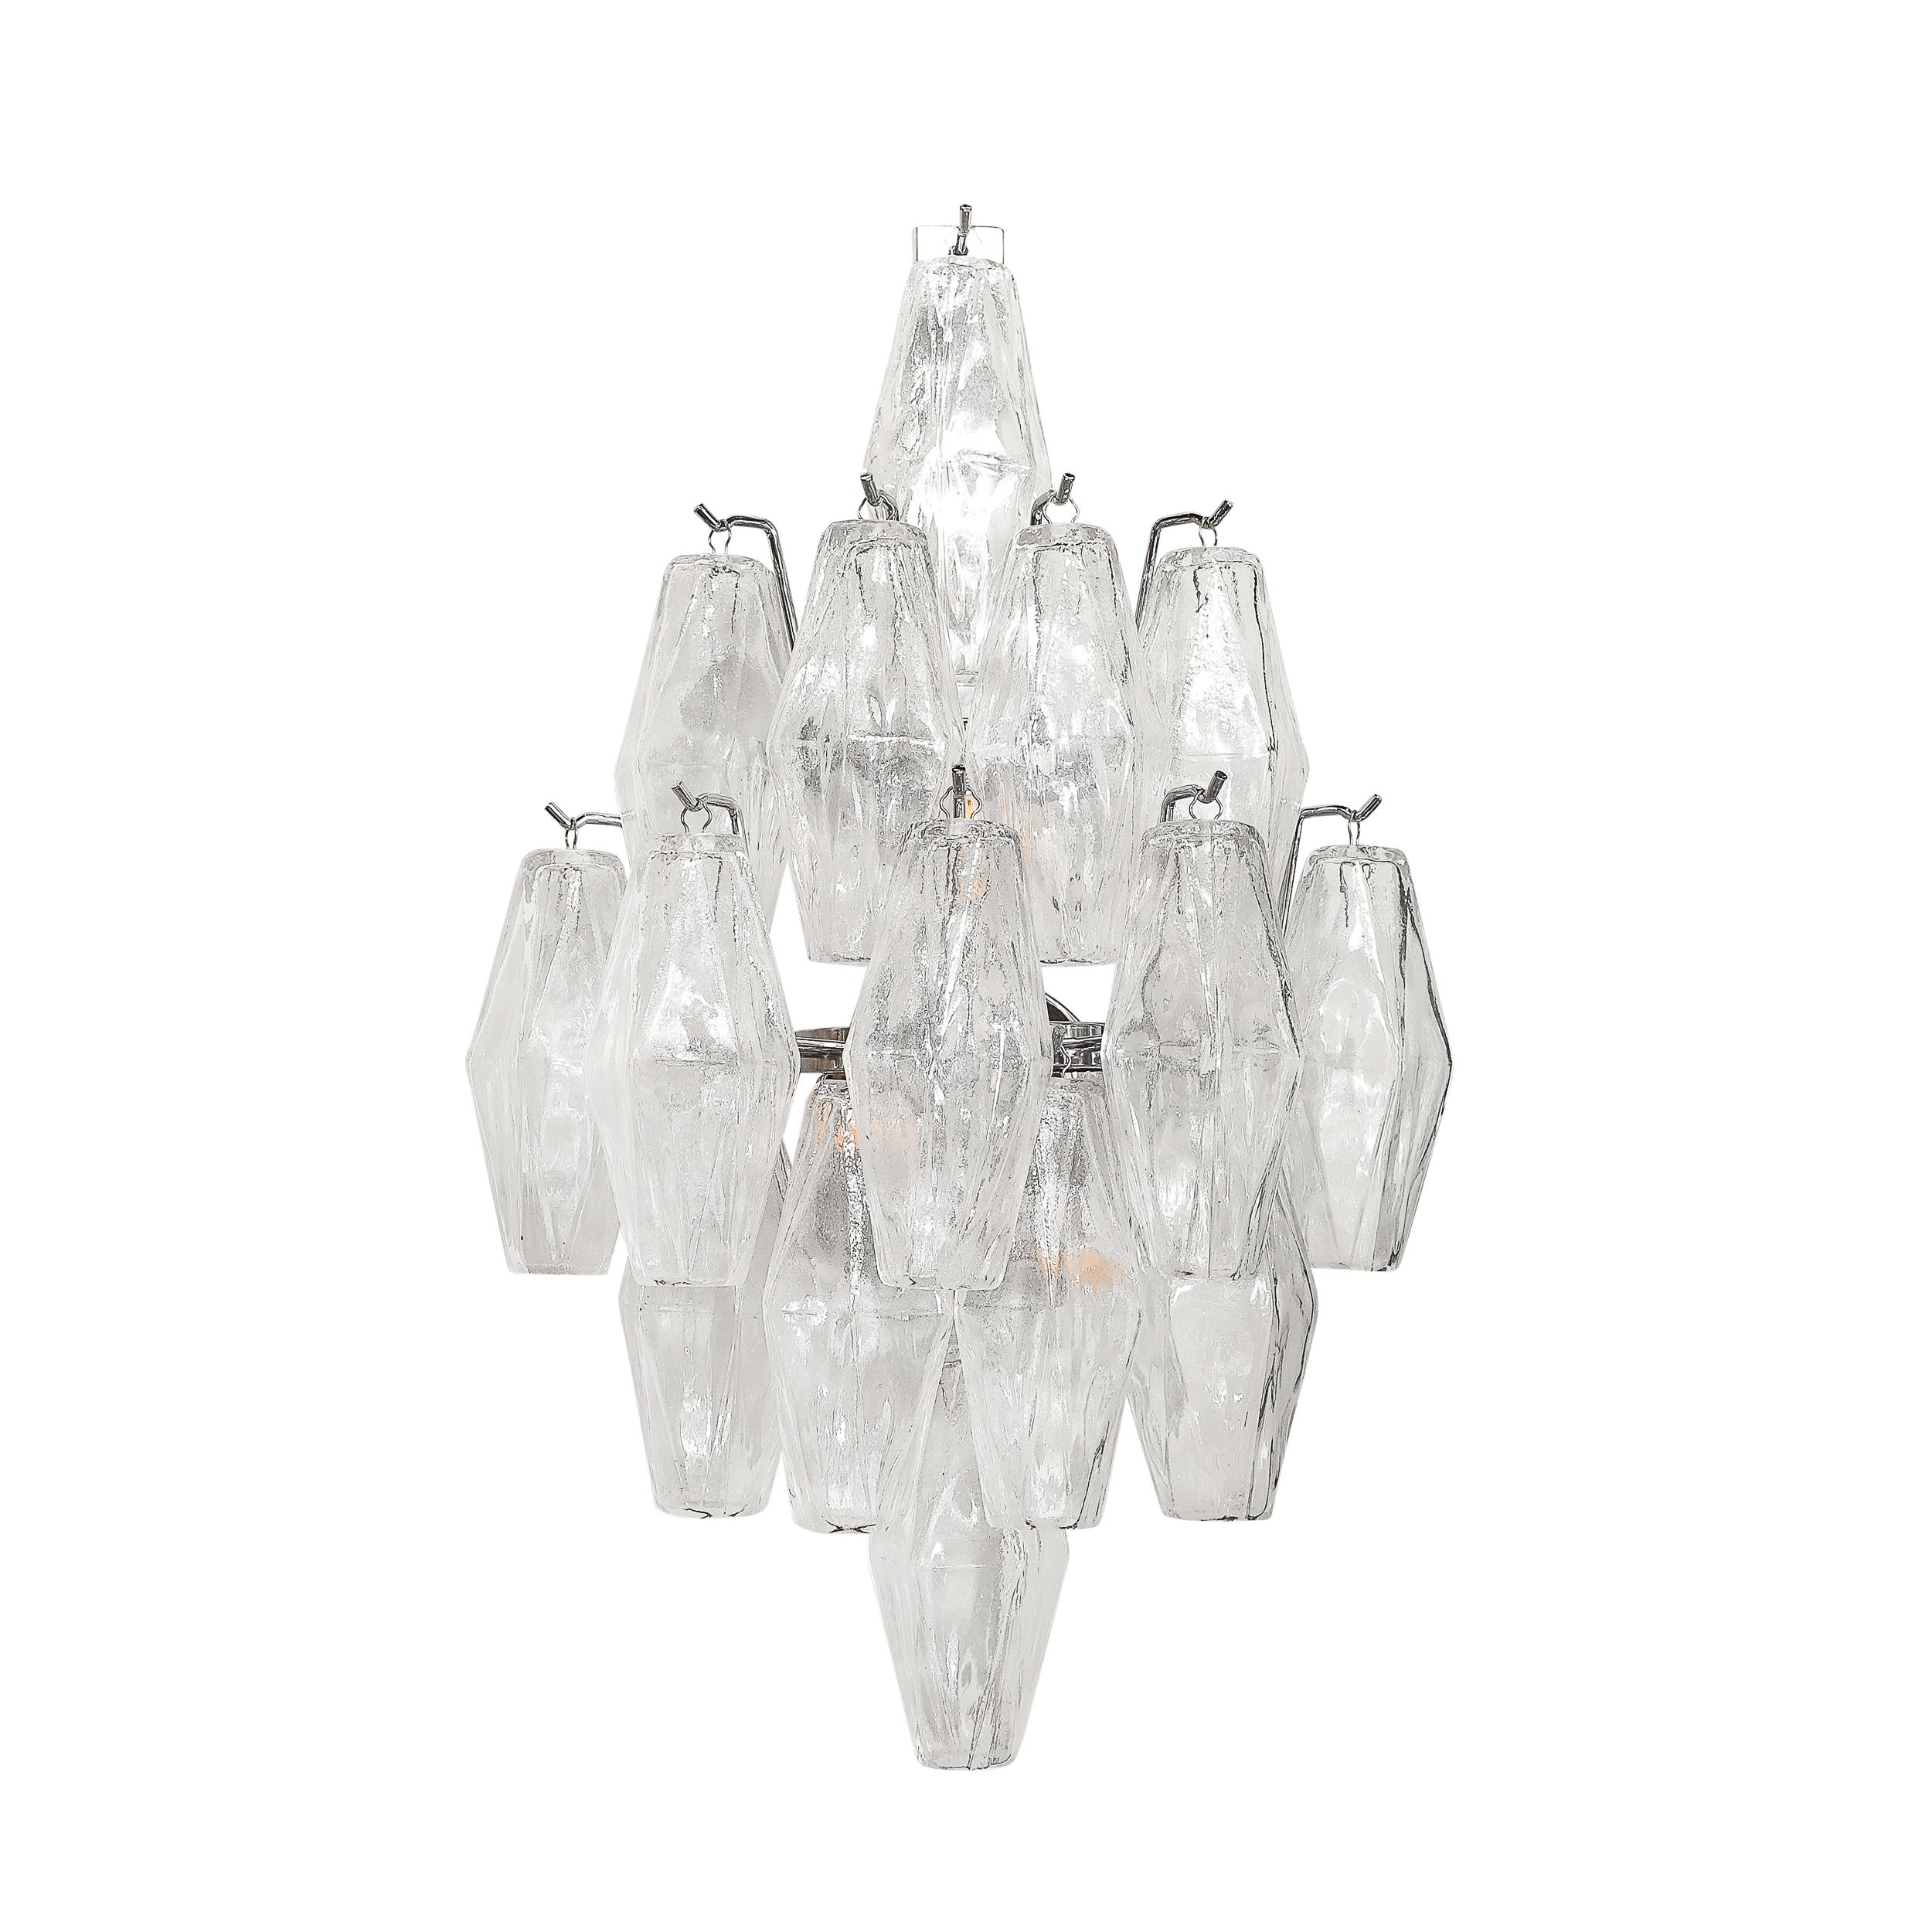 This beautifully elegant Pair of Modernist Hand-Blown Murano Glass Diamond Form Polyhedral Sconces W/Chrome Fittings originates from Italy during the later half of the 20th Century. They feature a geometric composition of transparent hand-blown